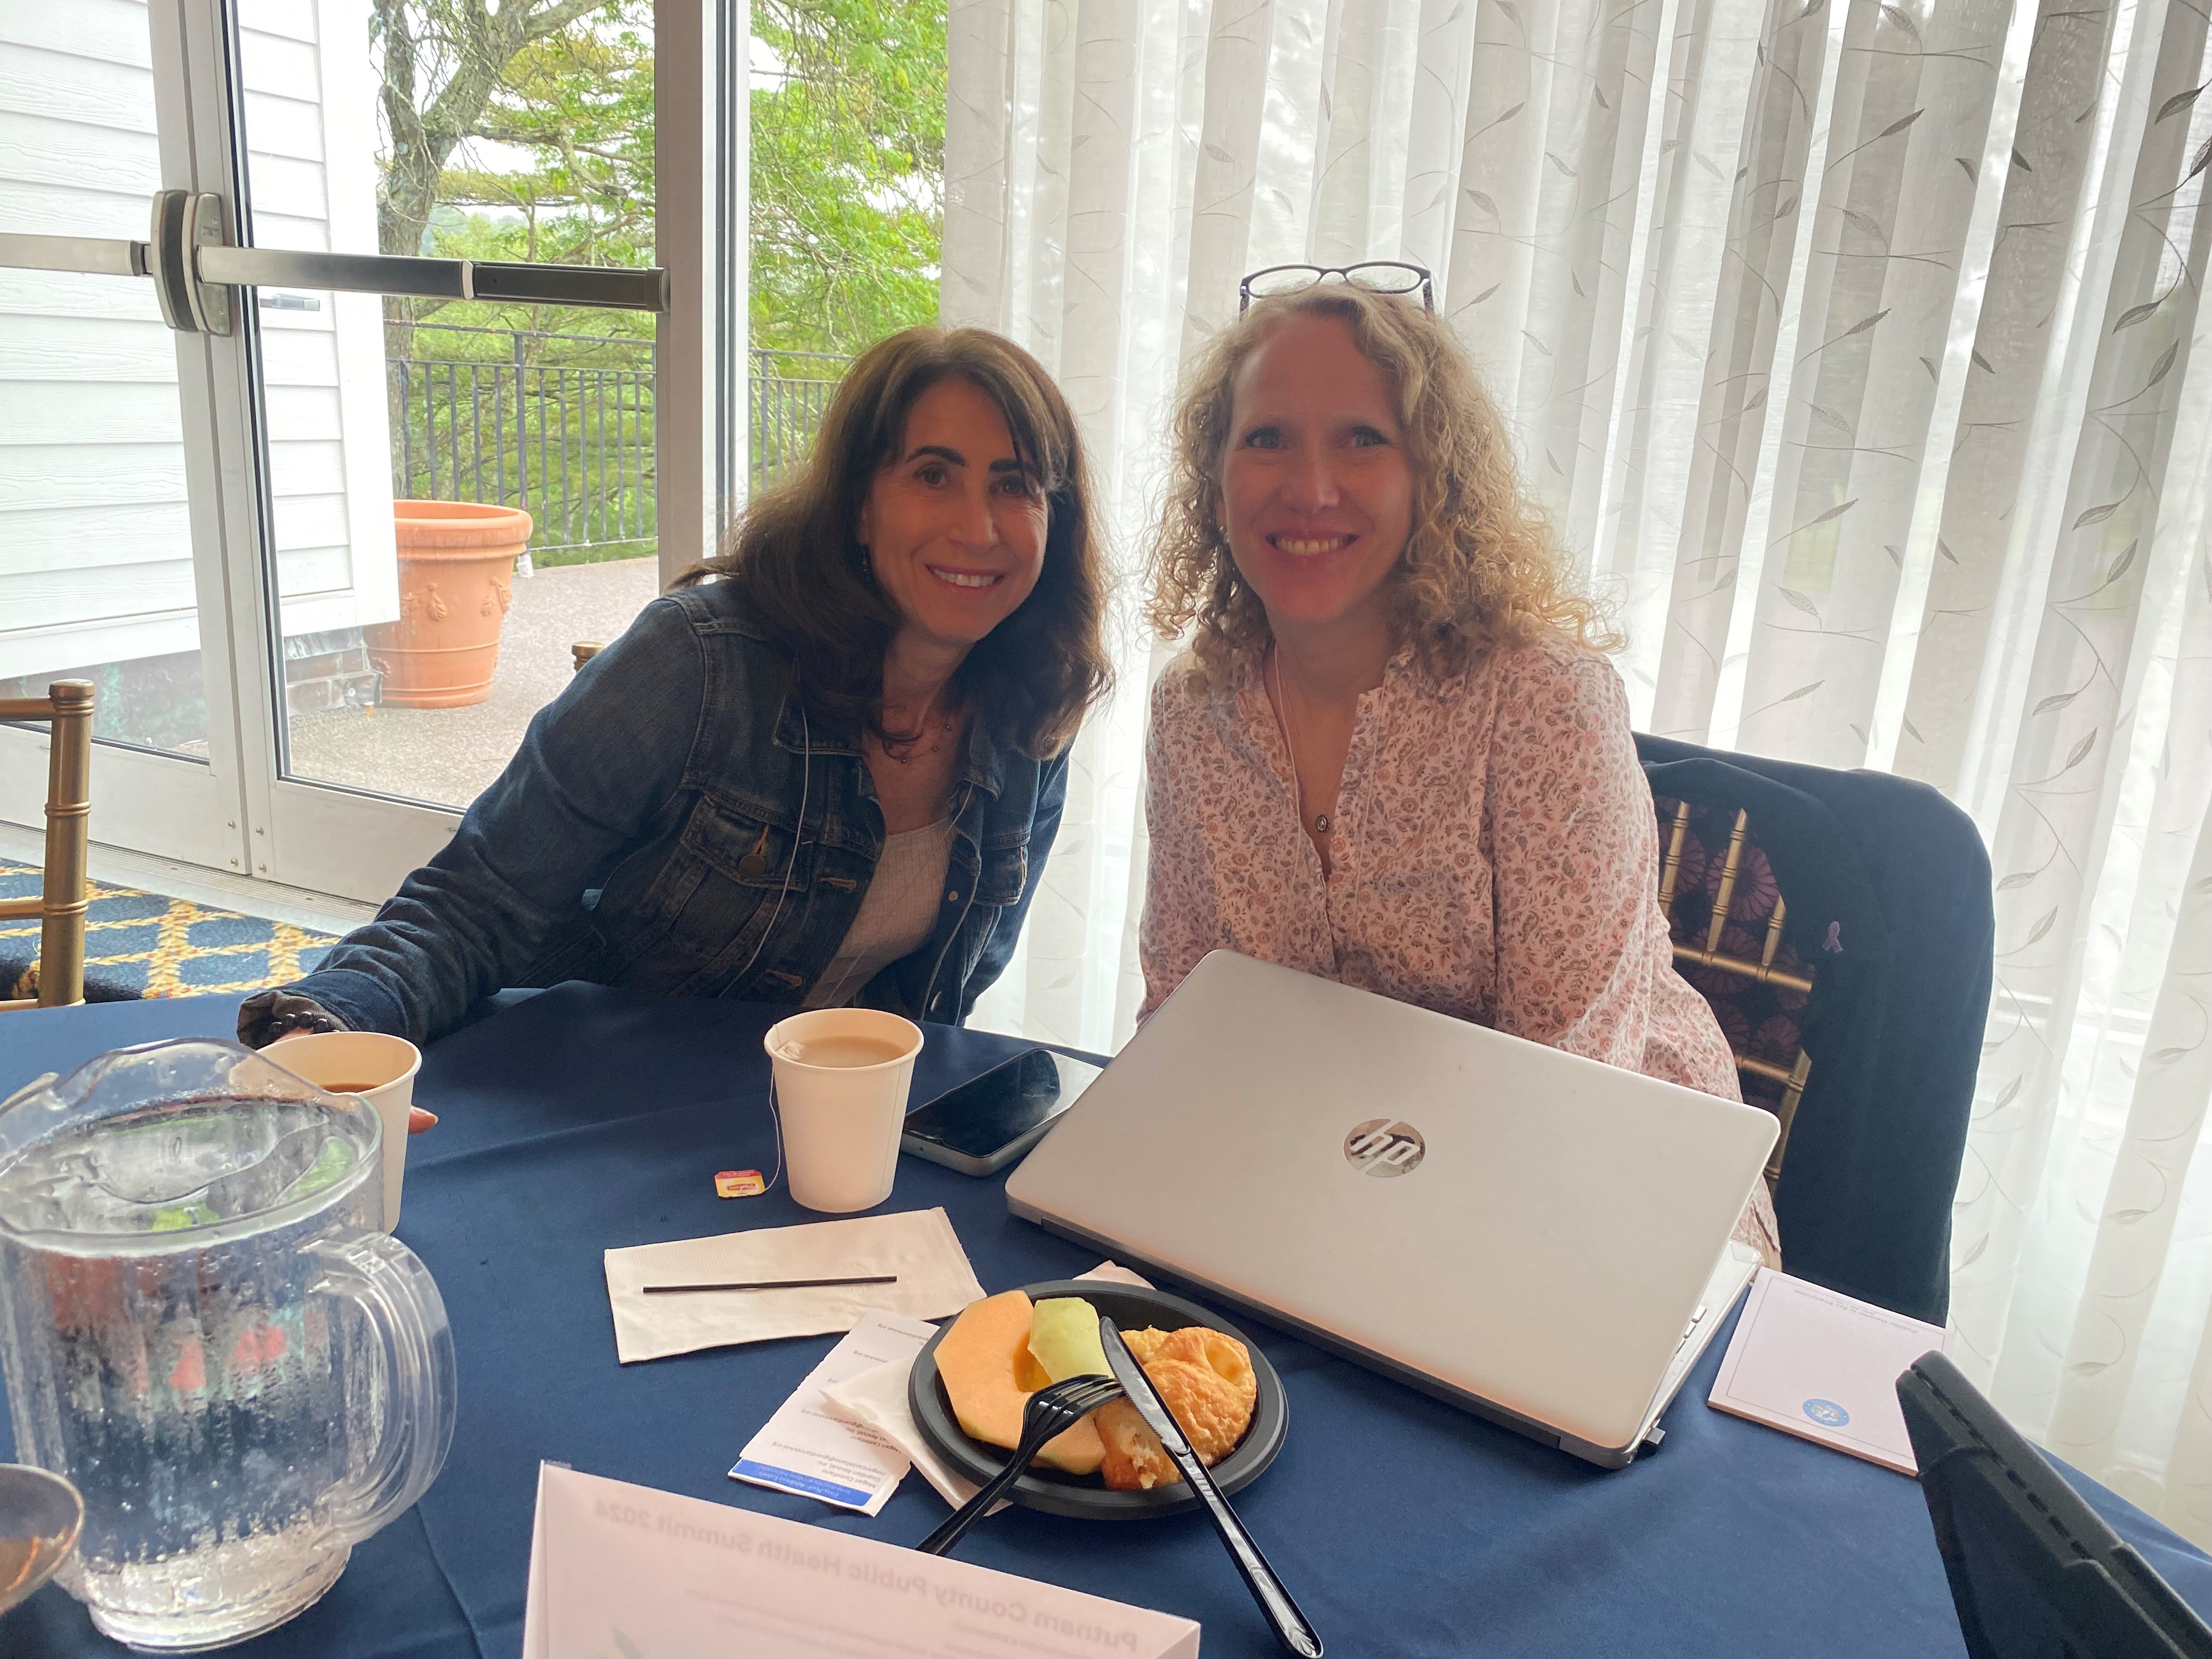 Longtime colleagues Marla Behler, LMSW, director of the Child Advocacy Center of Putnam County, shares a moment with Megan Castellano, MPA, program executive director, Guardian Homefront at Guardian Revival, and formerly executive director of the Mental Health Association of Putnam.